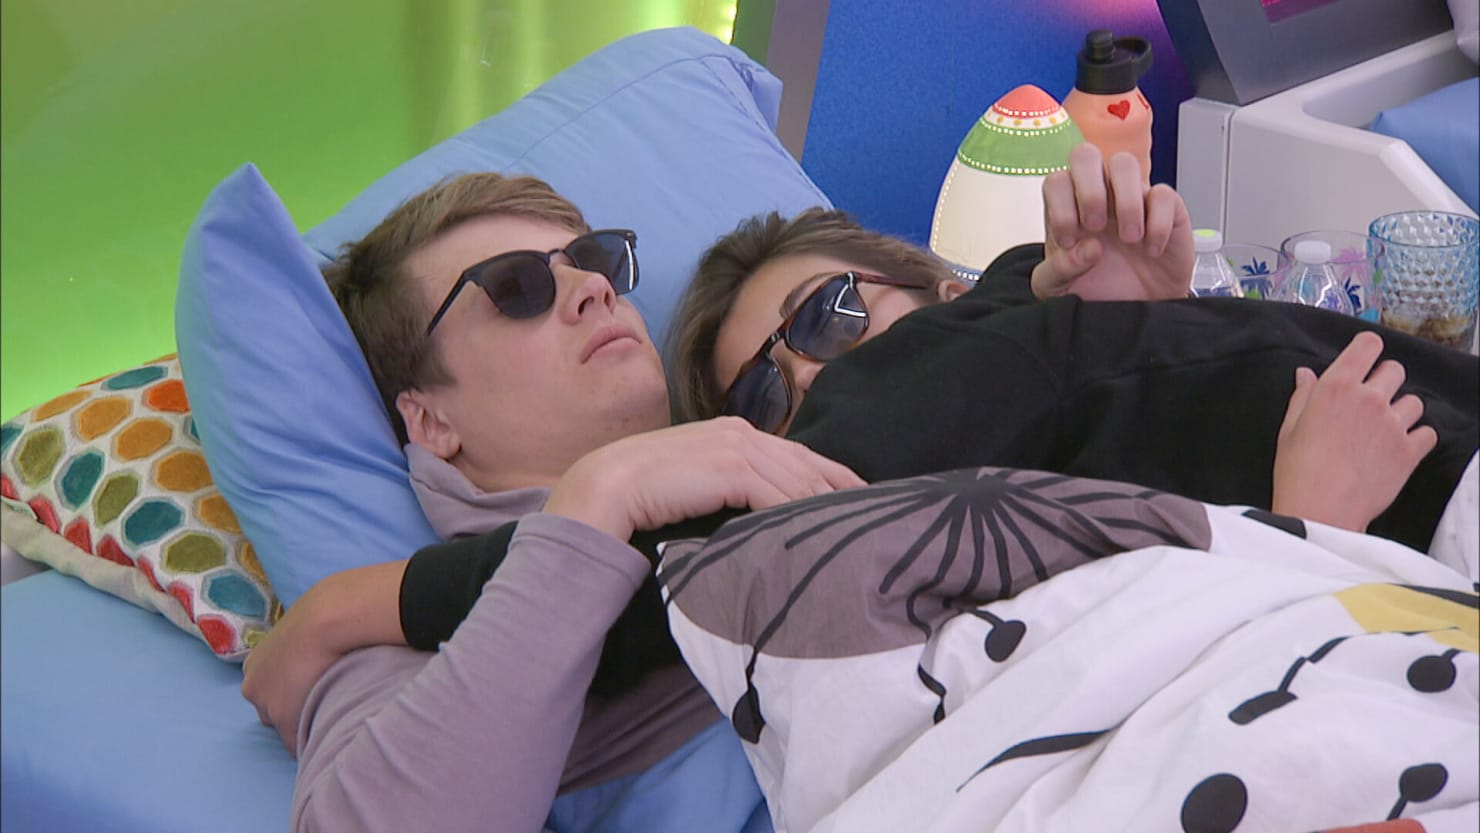 Sex Bro Force Sleep - Big Brother' Kyle and Alyssa Having Sex on Pool Floats Scarred Me for Life